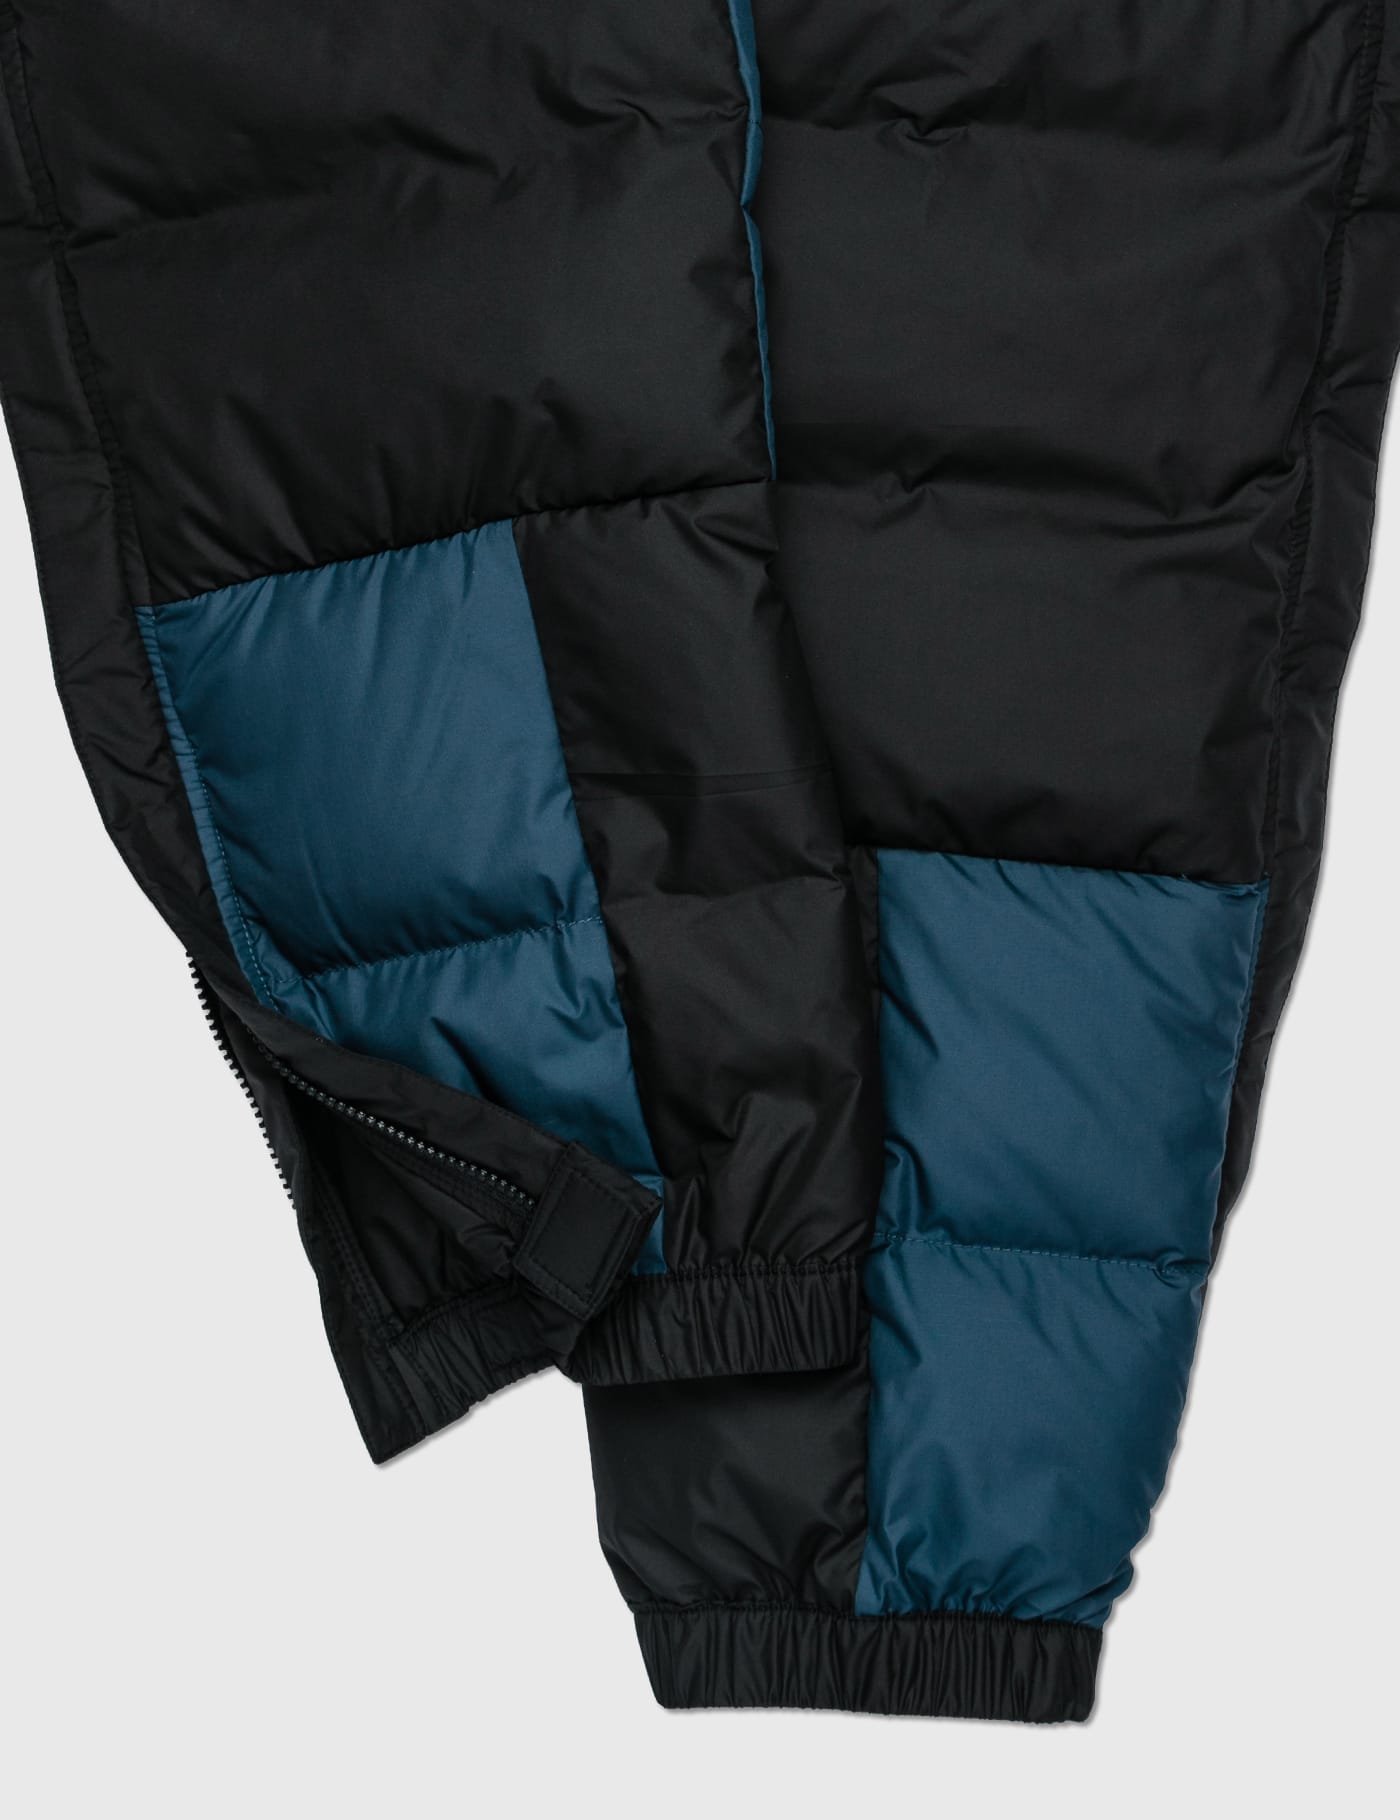 north face expedition pants